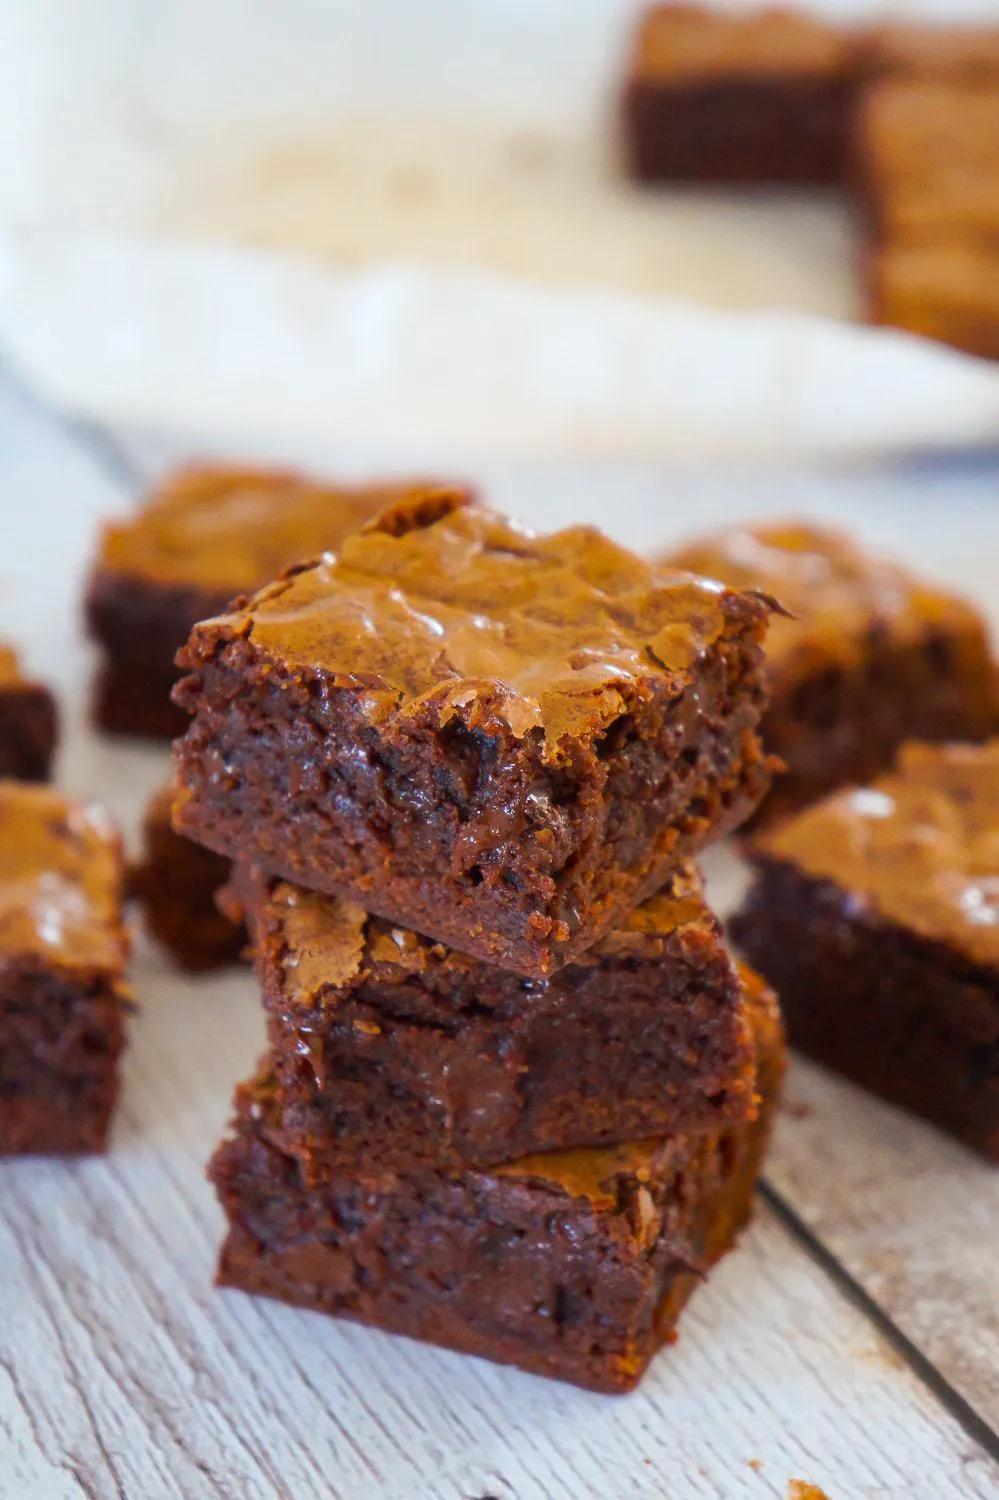 Homemade Brownies from Scratch - THIS IS NOT DIET FOOD